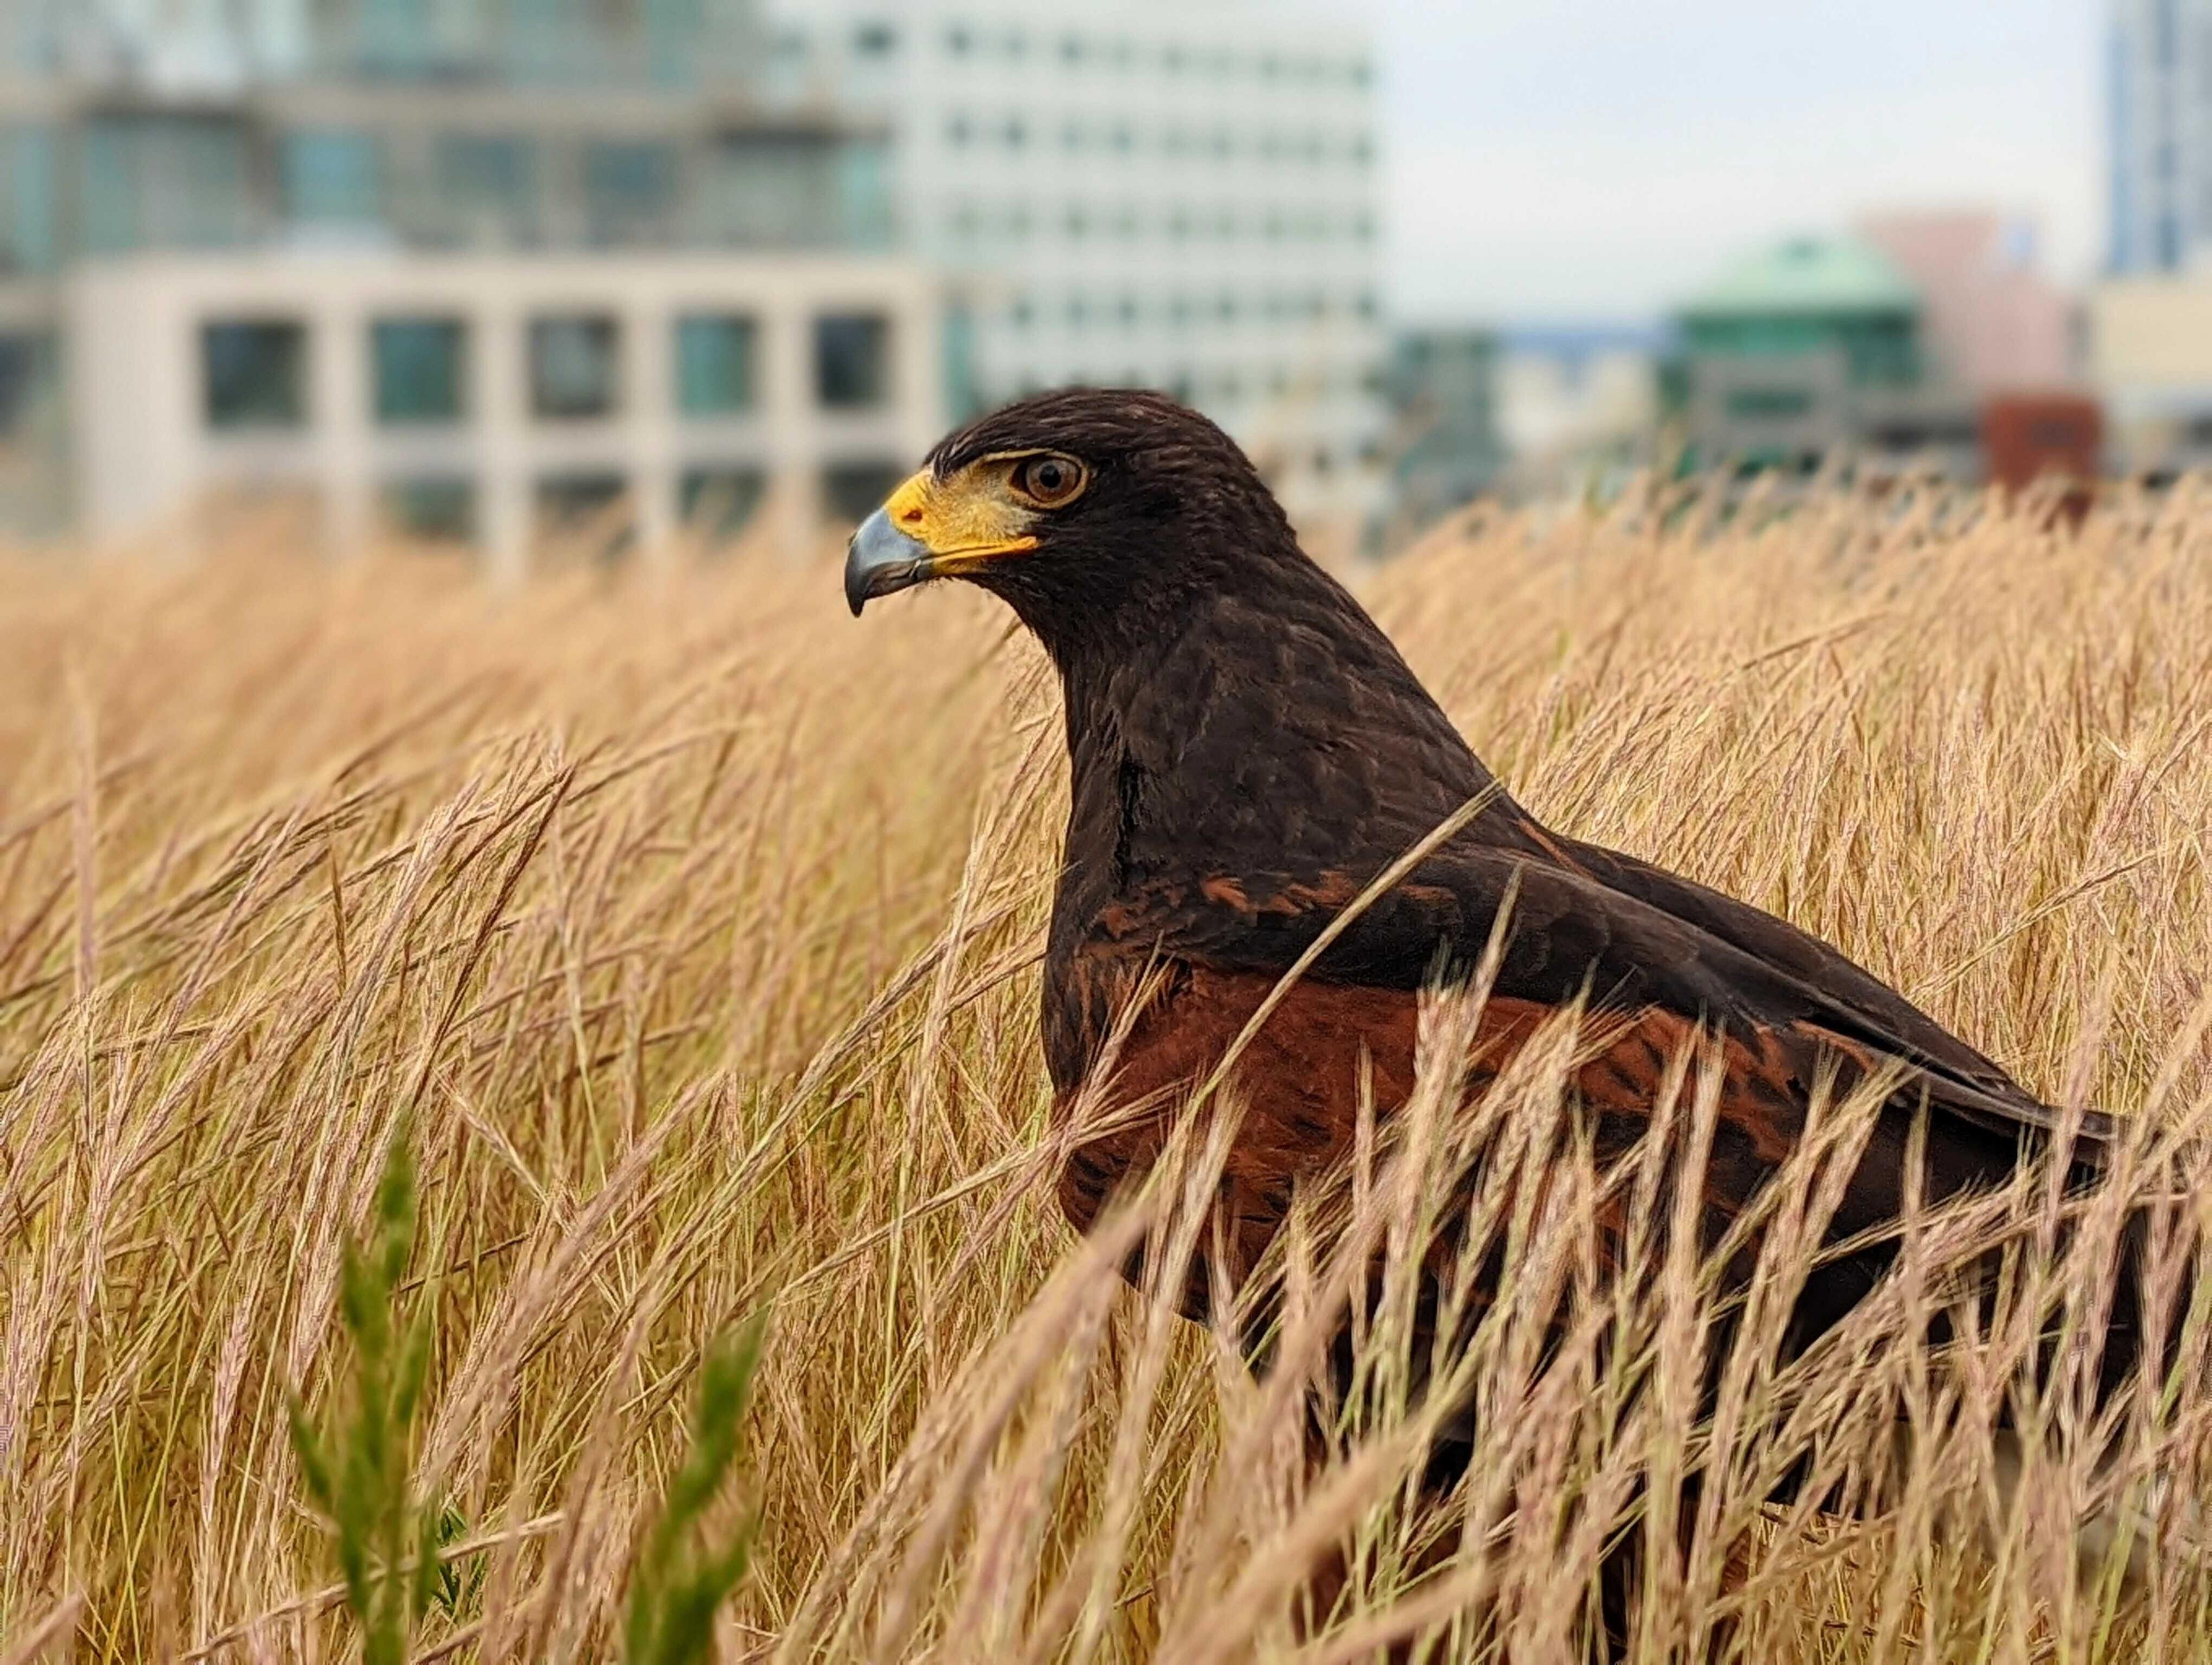 Hawk standing on a grassy rooftop